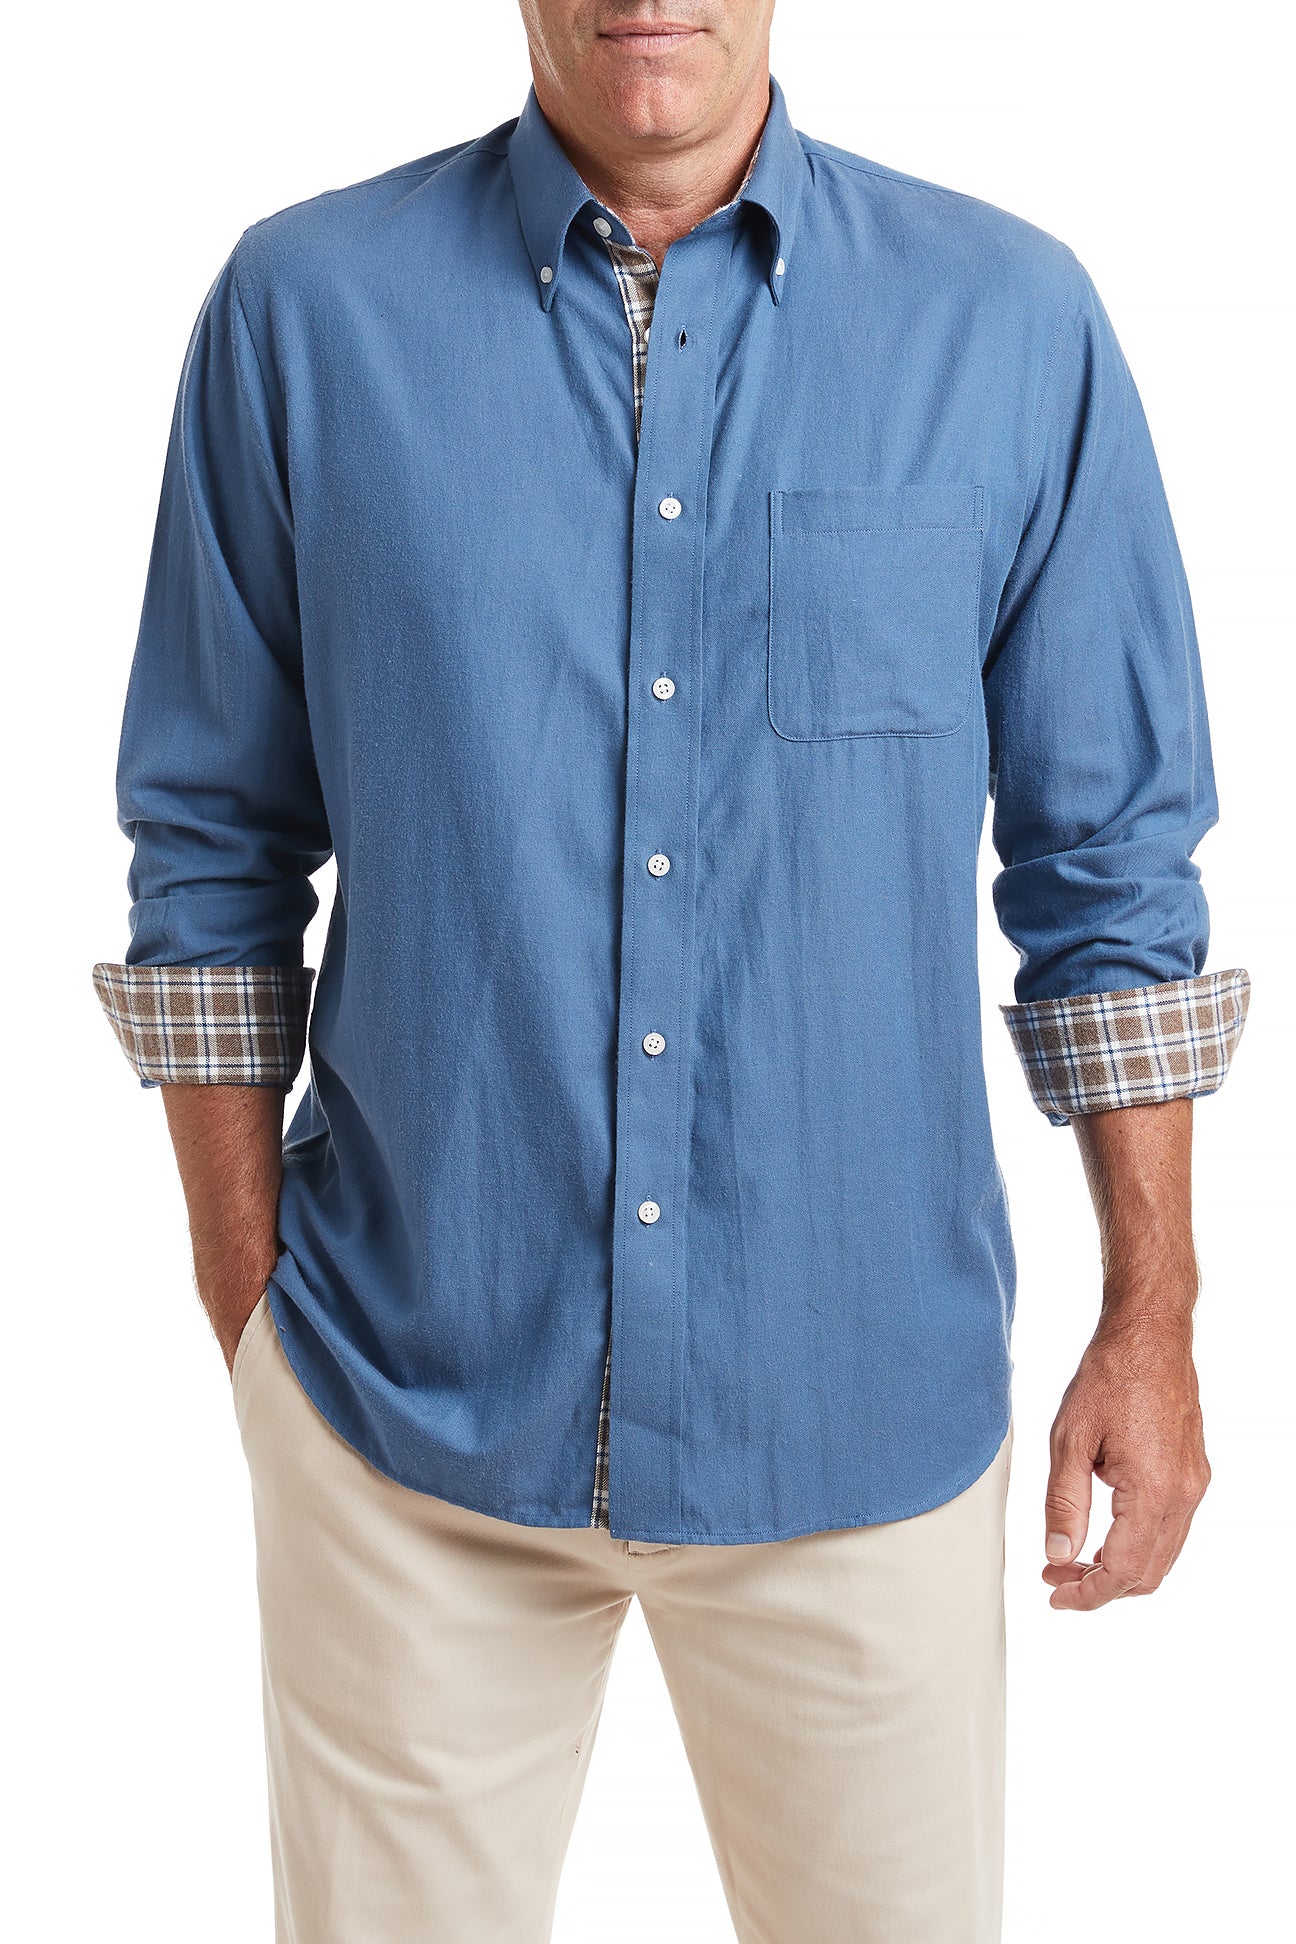 Chase Shirt Mariner Blue Flannel with Stable Tattersall Tan Trim MENS SPORT SHIRTS Castaway Nantucket Island